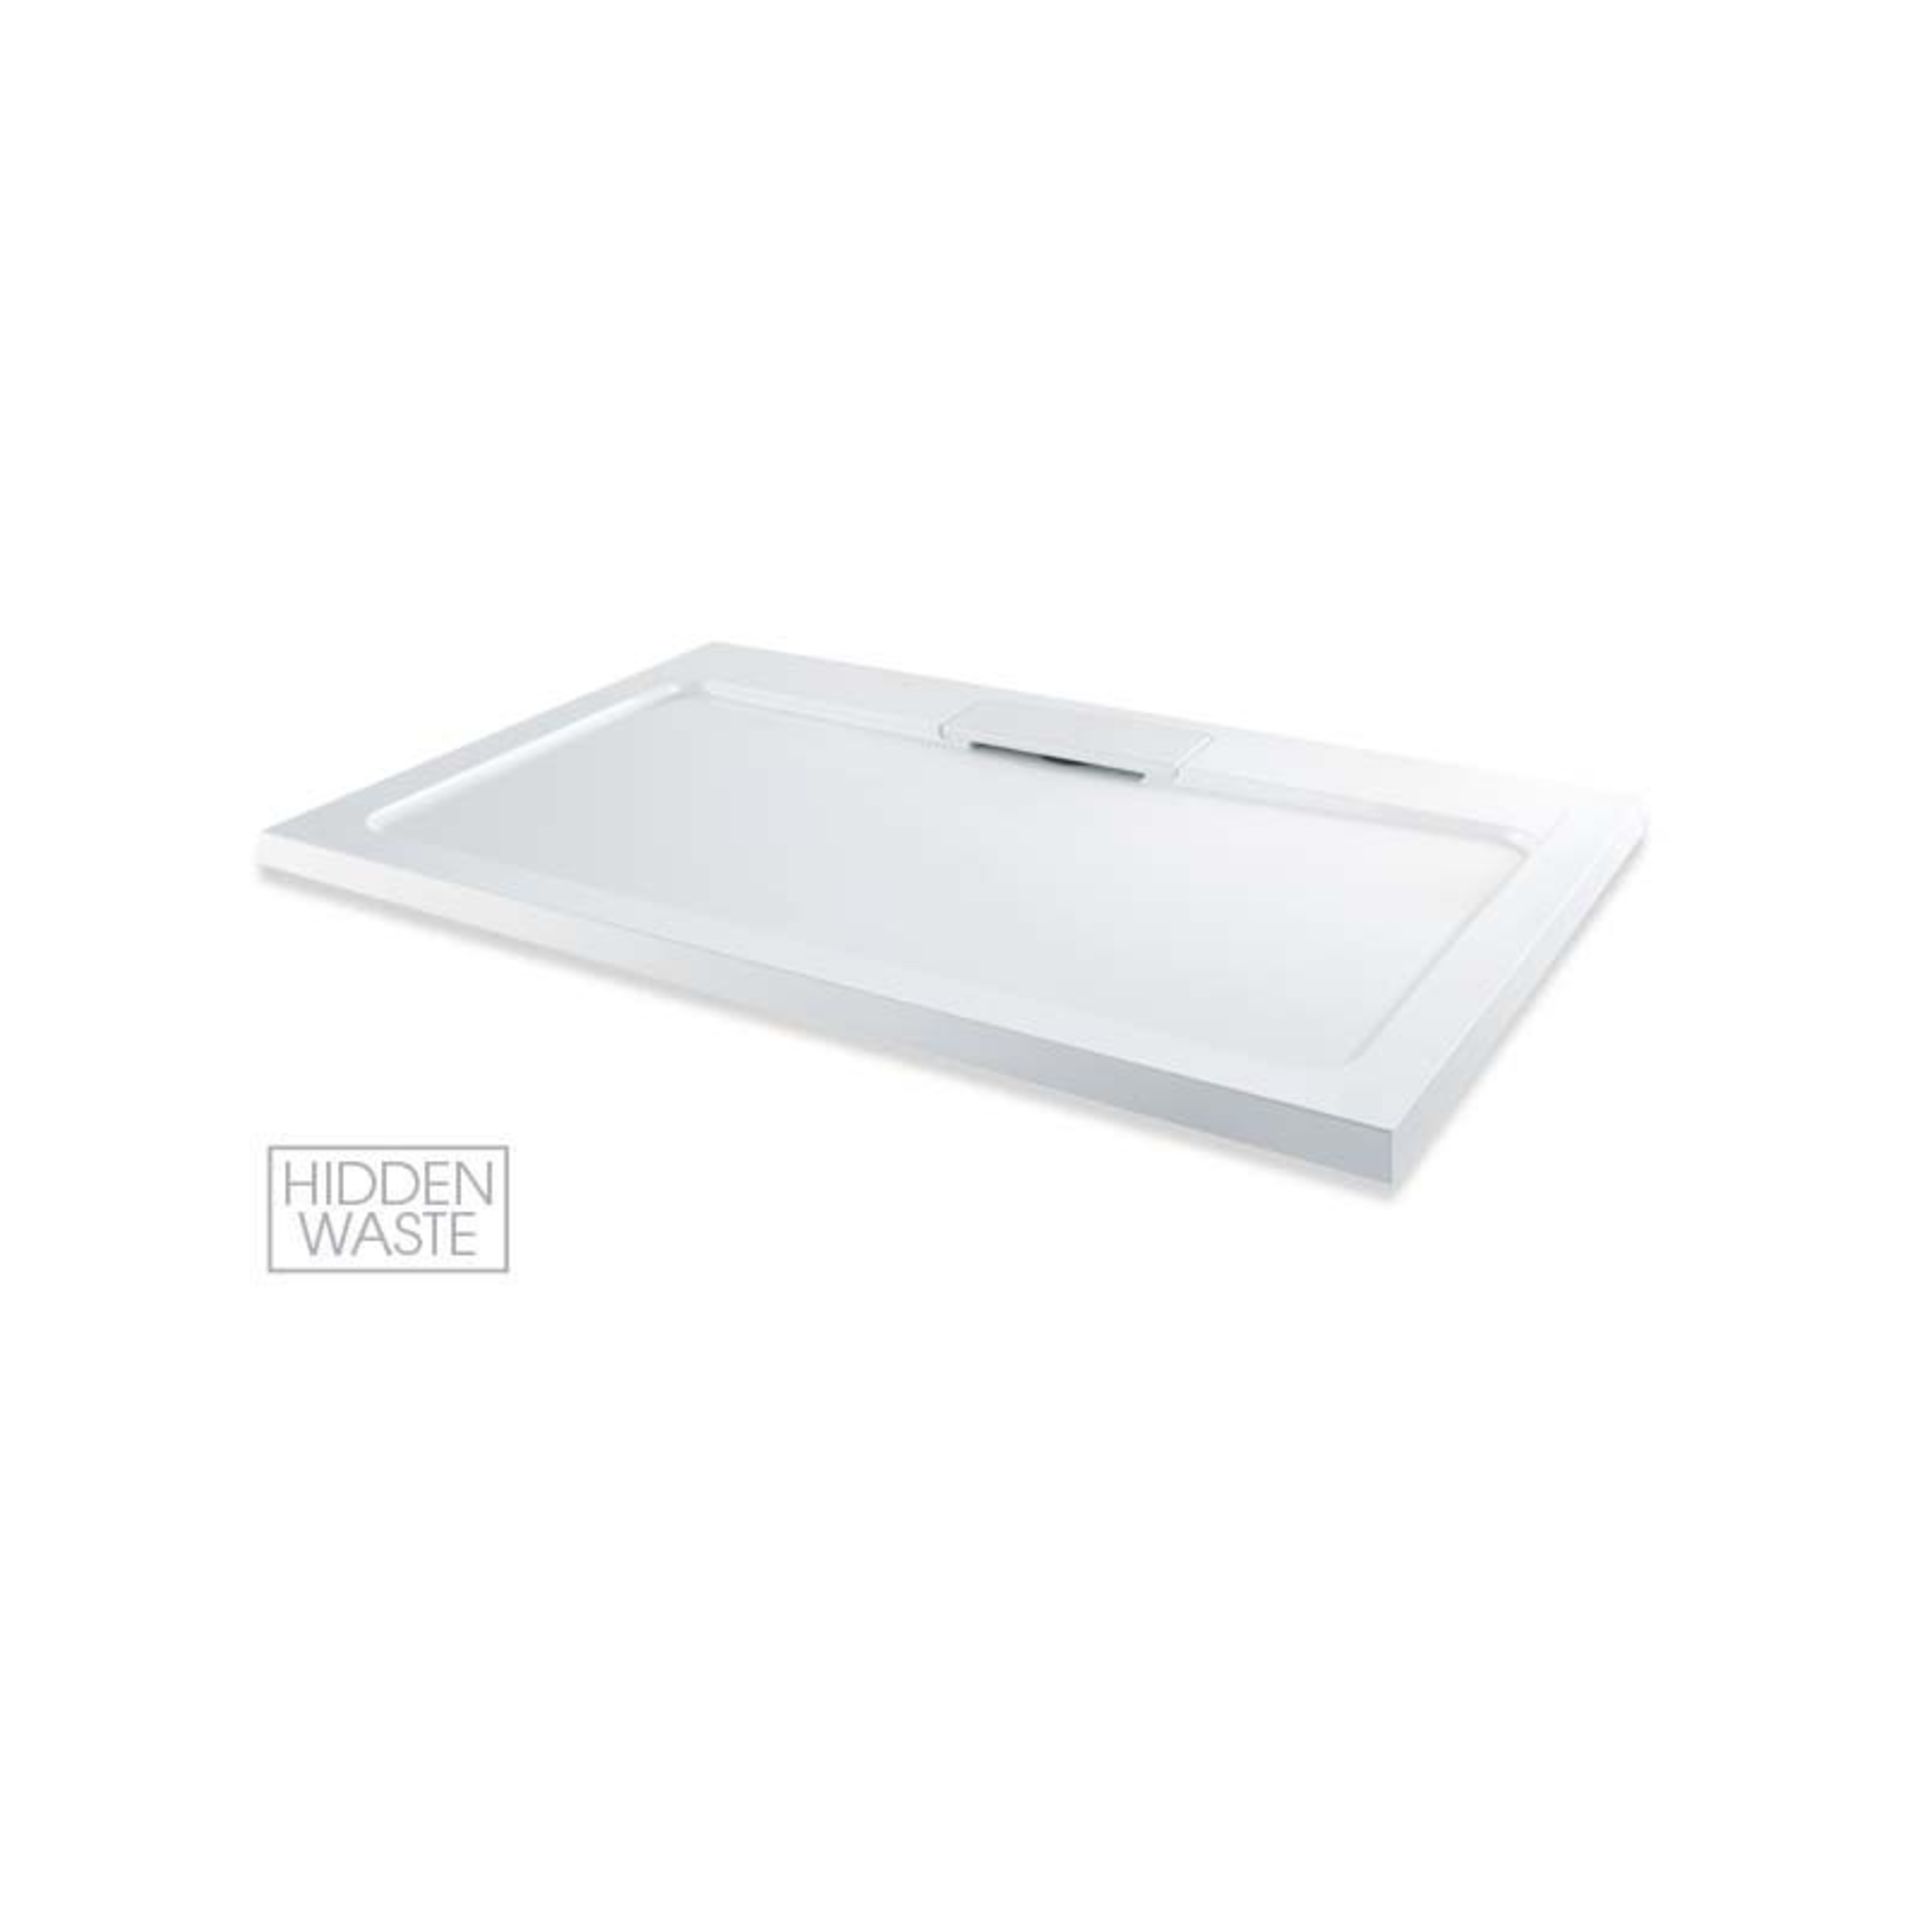 New 1200x800mm Luxe Ultra Slim Stone Shower Tray Hidden Waste - White. Manufactured In The UK F...